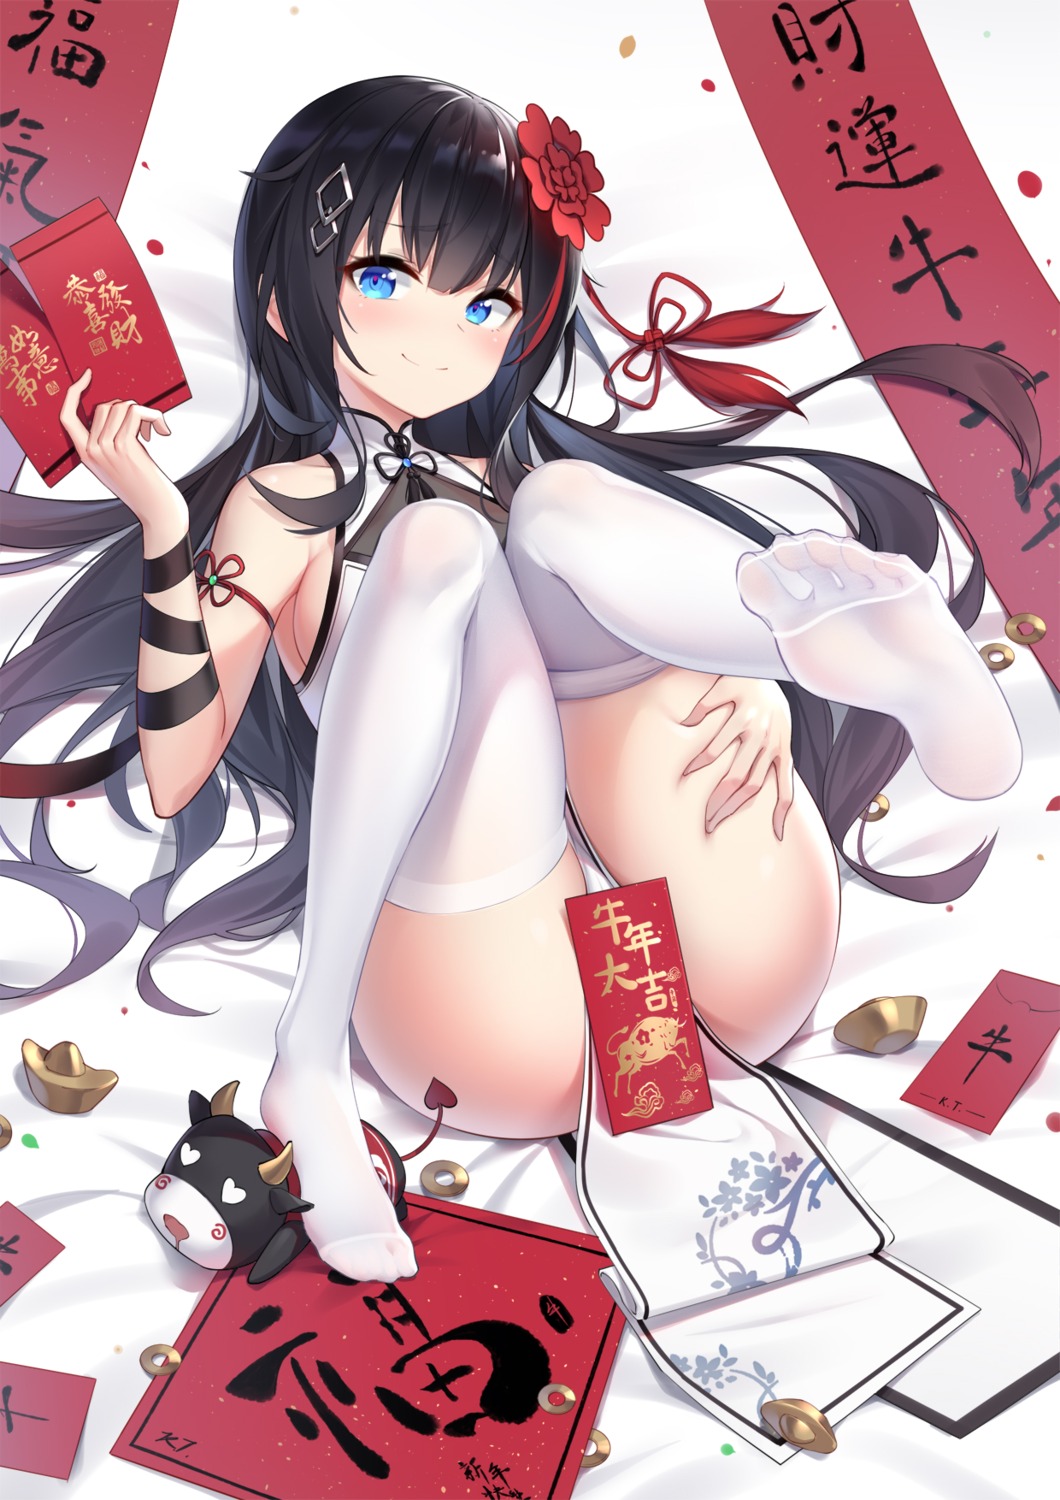 artist_revision chinadress feet k.t.cube thighhighs